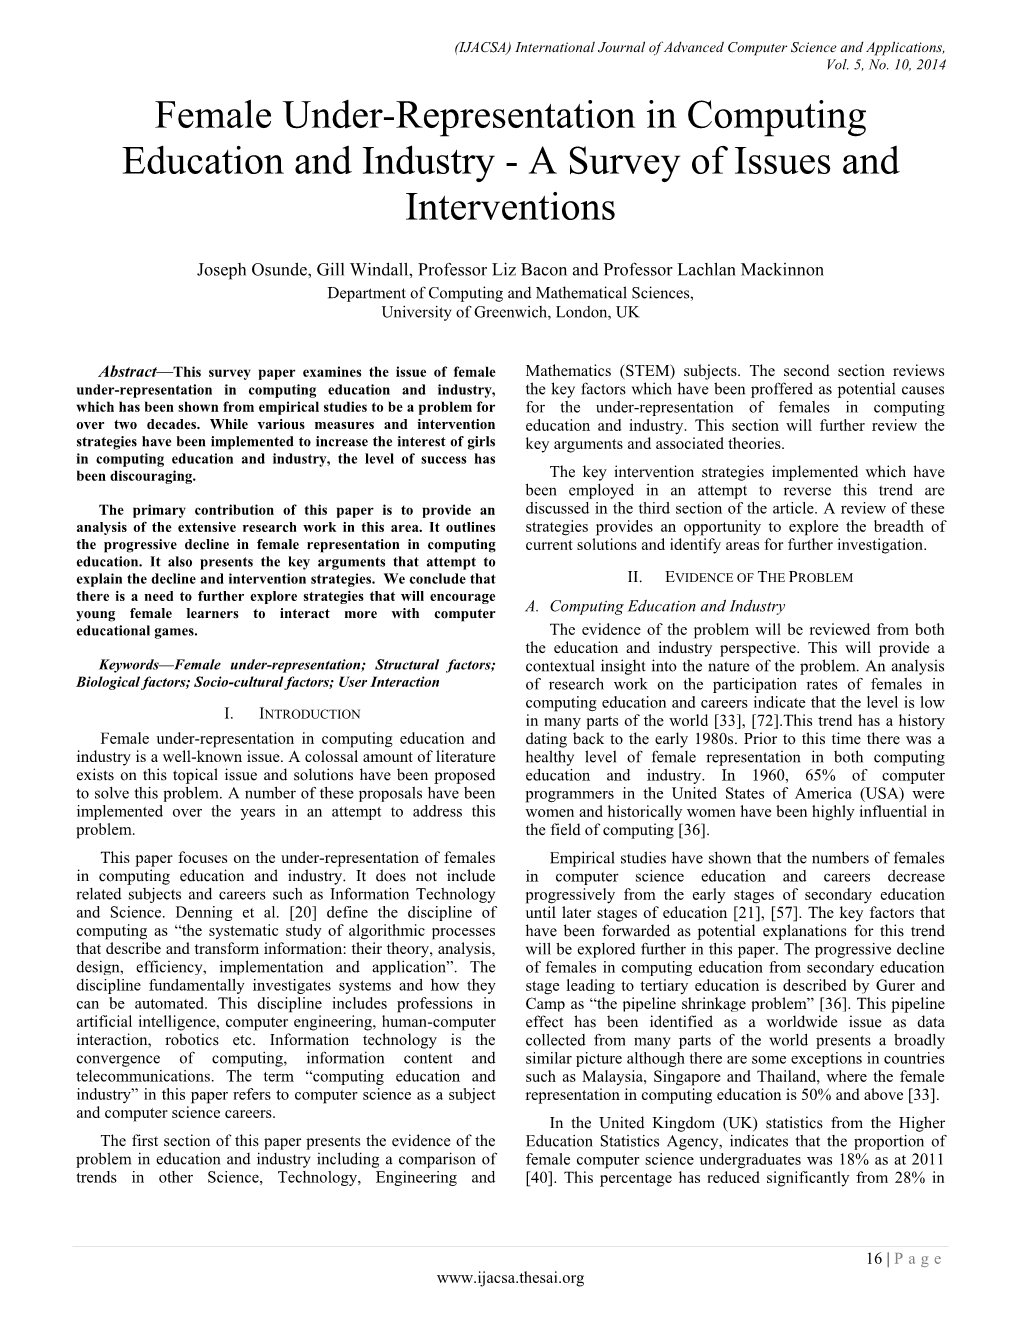 Female Under-Representation in Computing Education and Industry - a Survey of Issues and Interventions